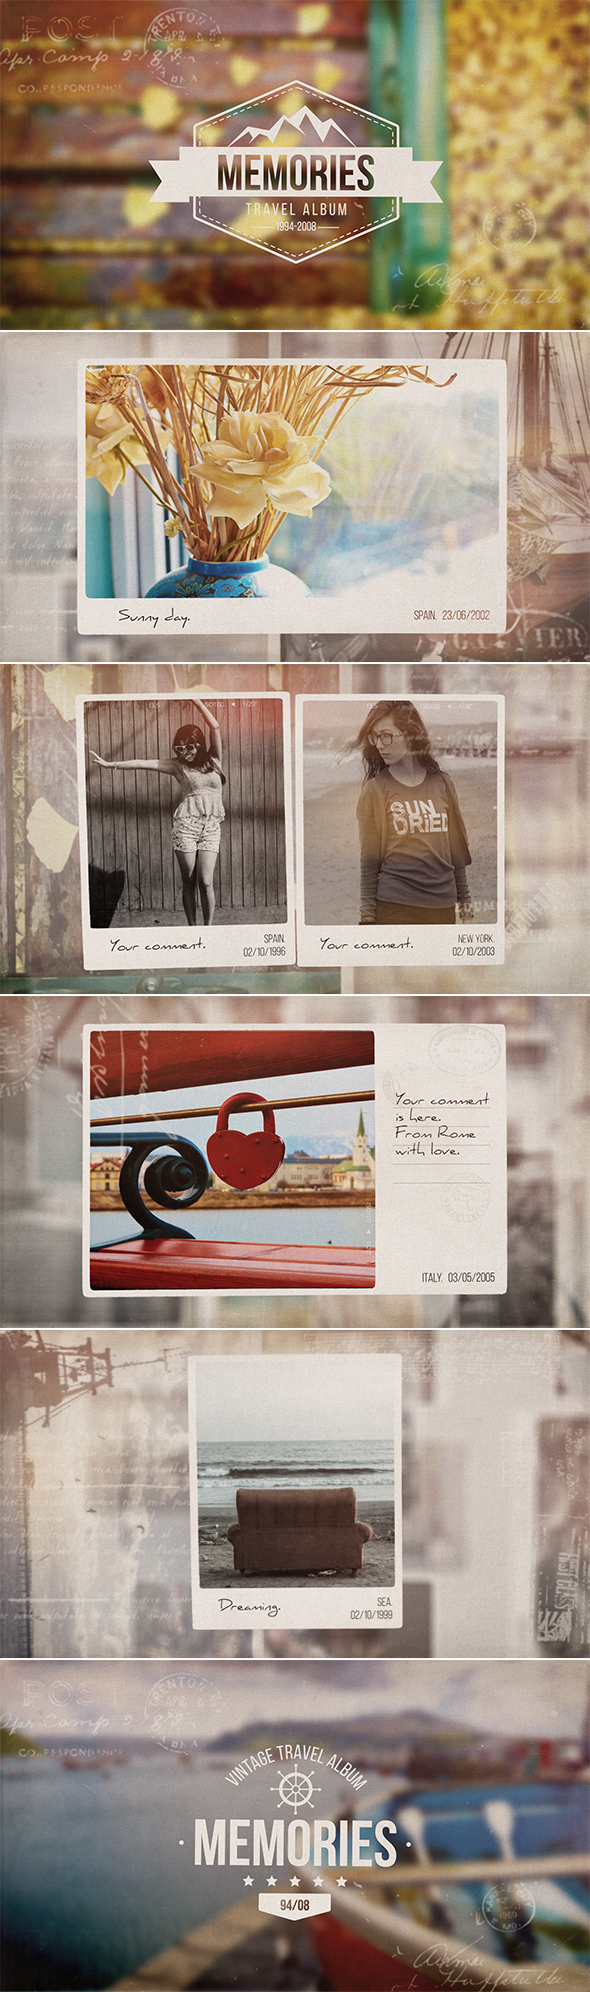 Vintage Slideshow 10368174  - Free After Effects Templates